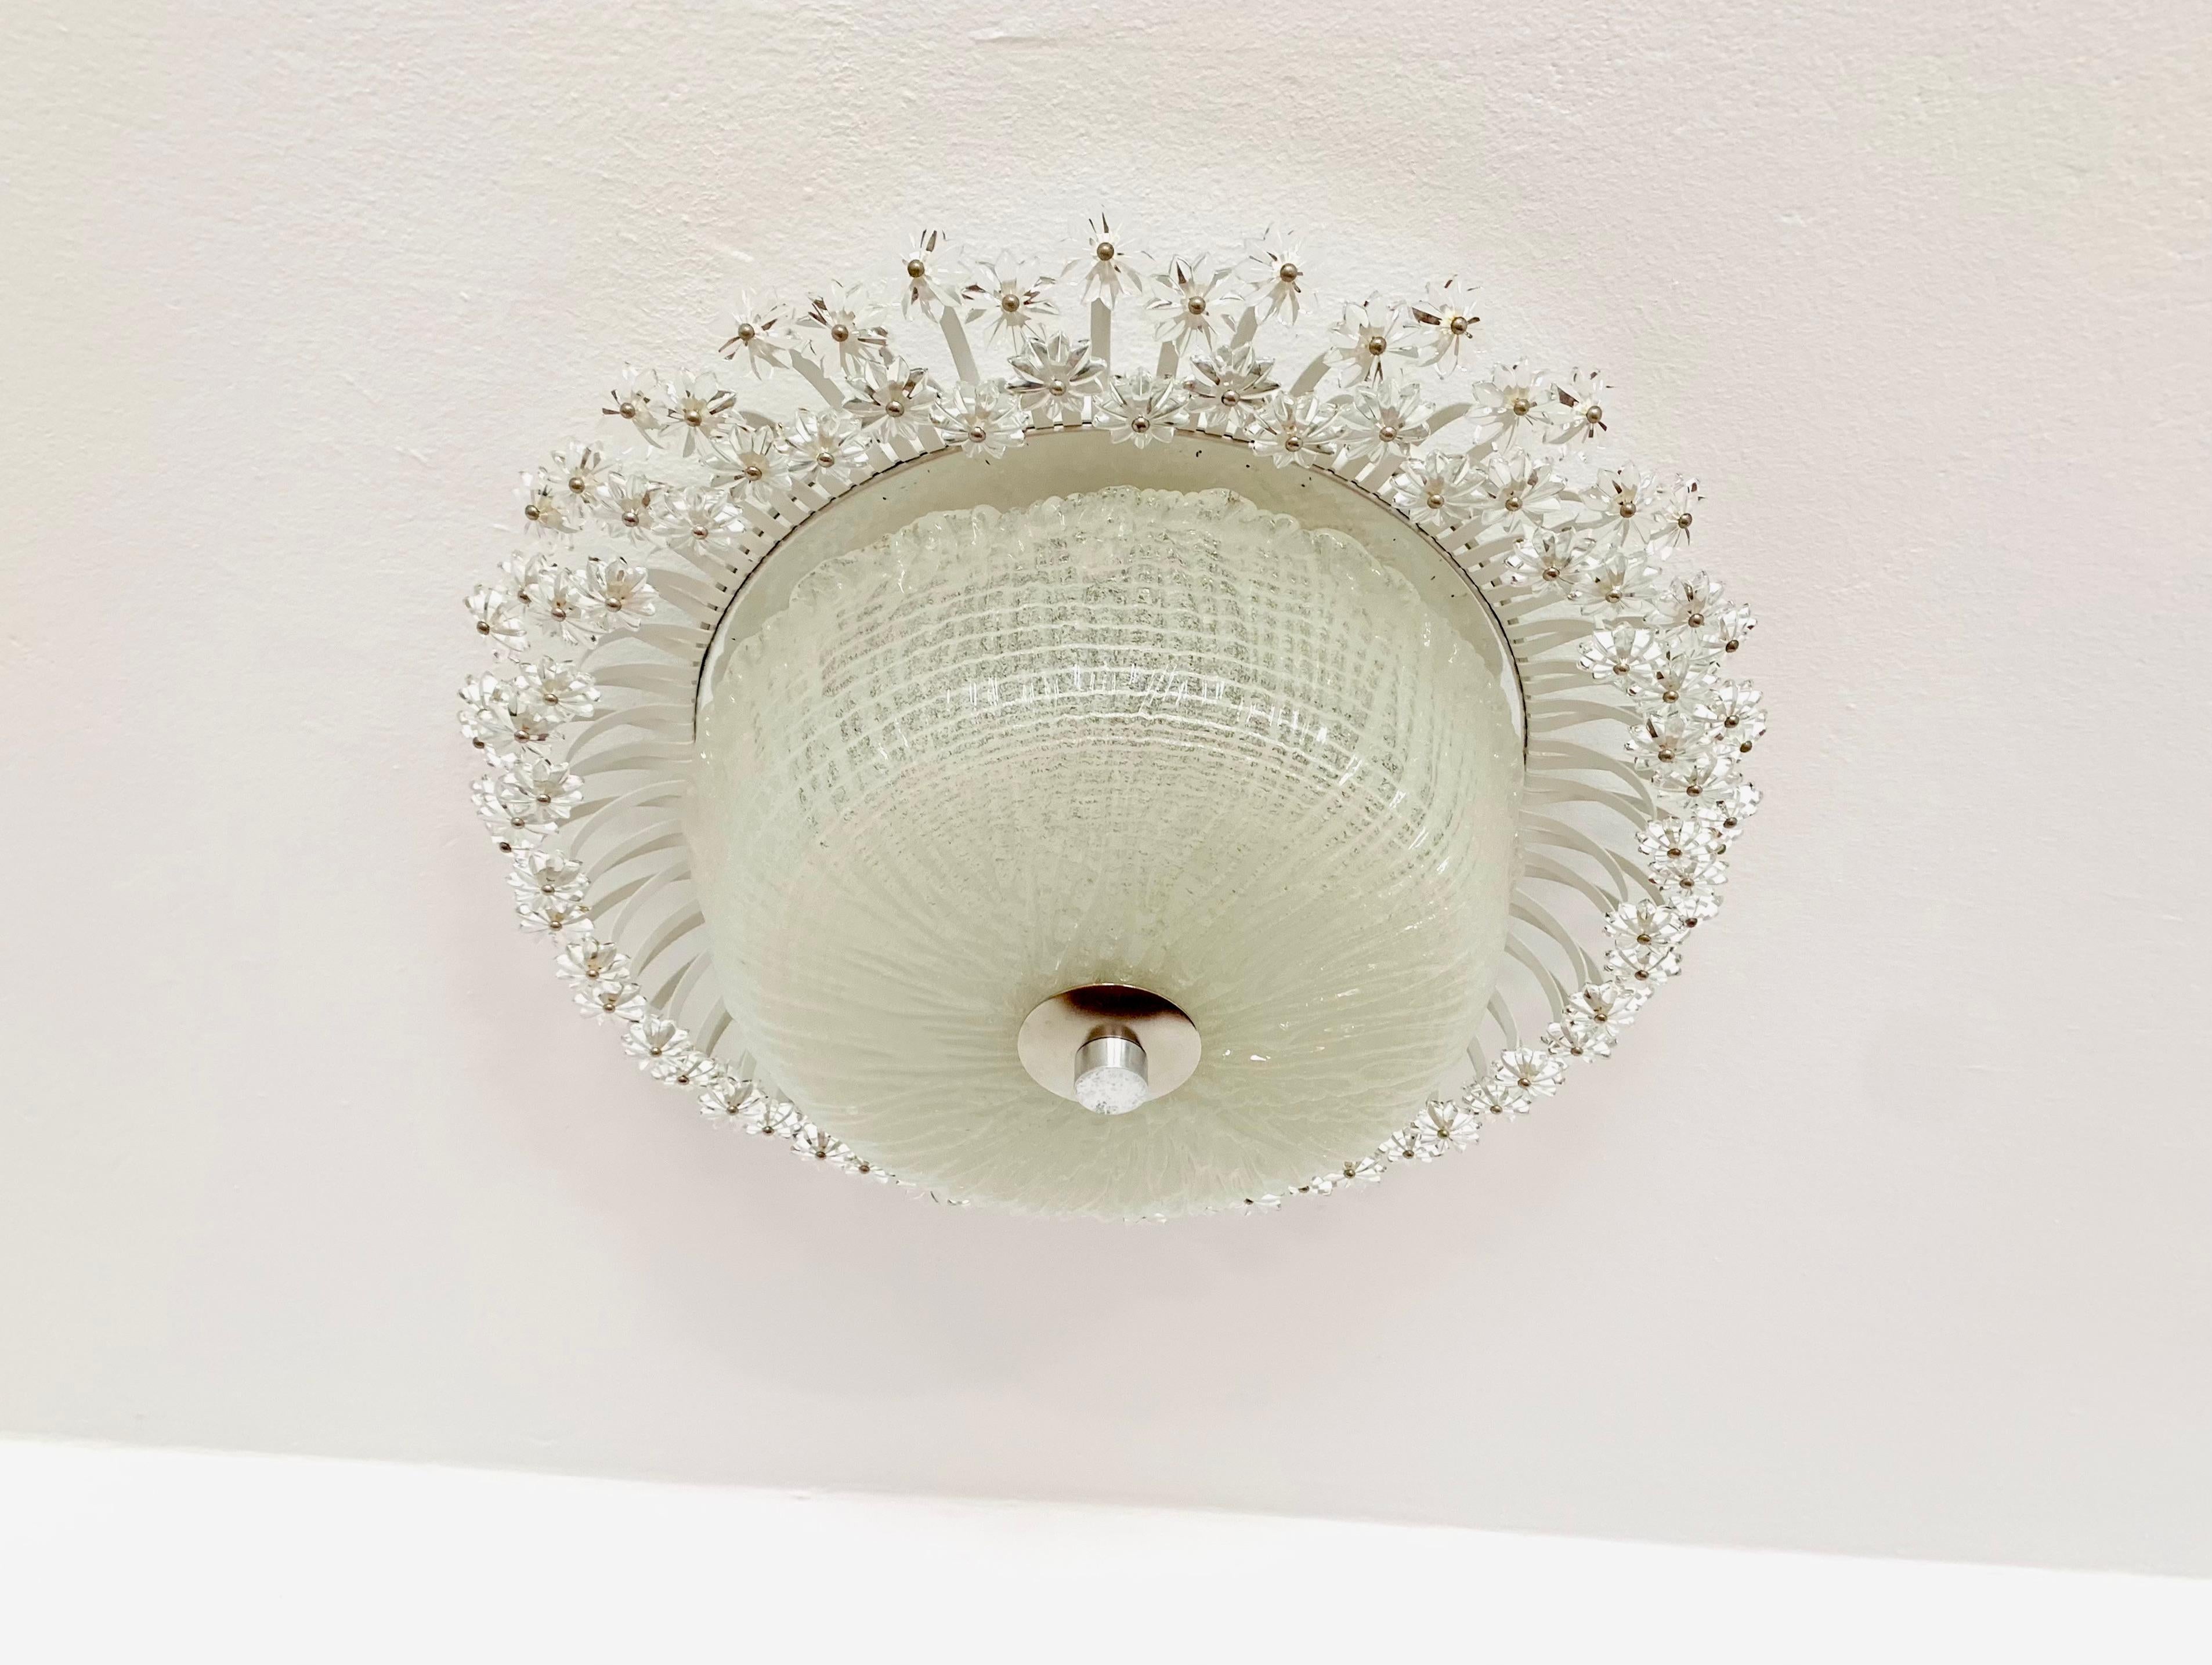 Impressive floral ceiling lamp from the 1960s.
Extremely successful design and very high quality workmanship.
The floral crystals create a spectacular play of light.
Very luxurious and an asset to any home.

Condition:

Very good vintage condition